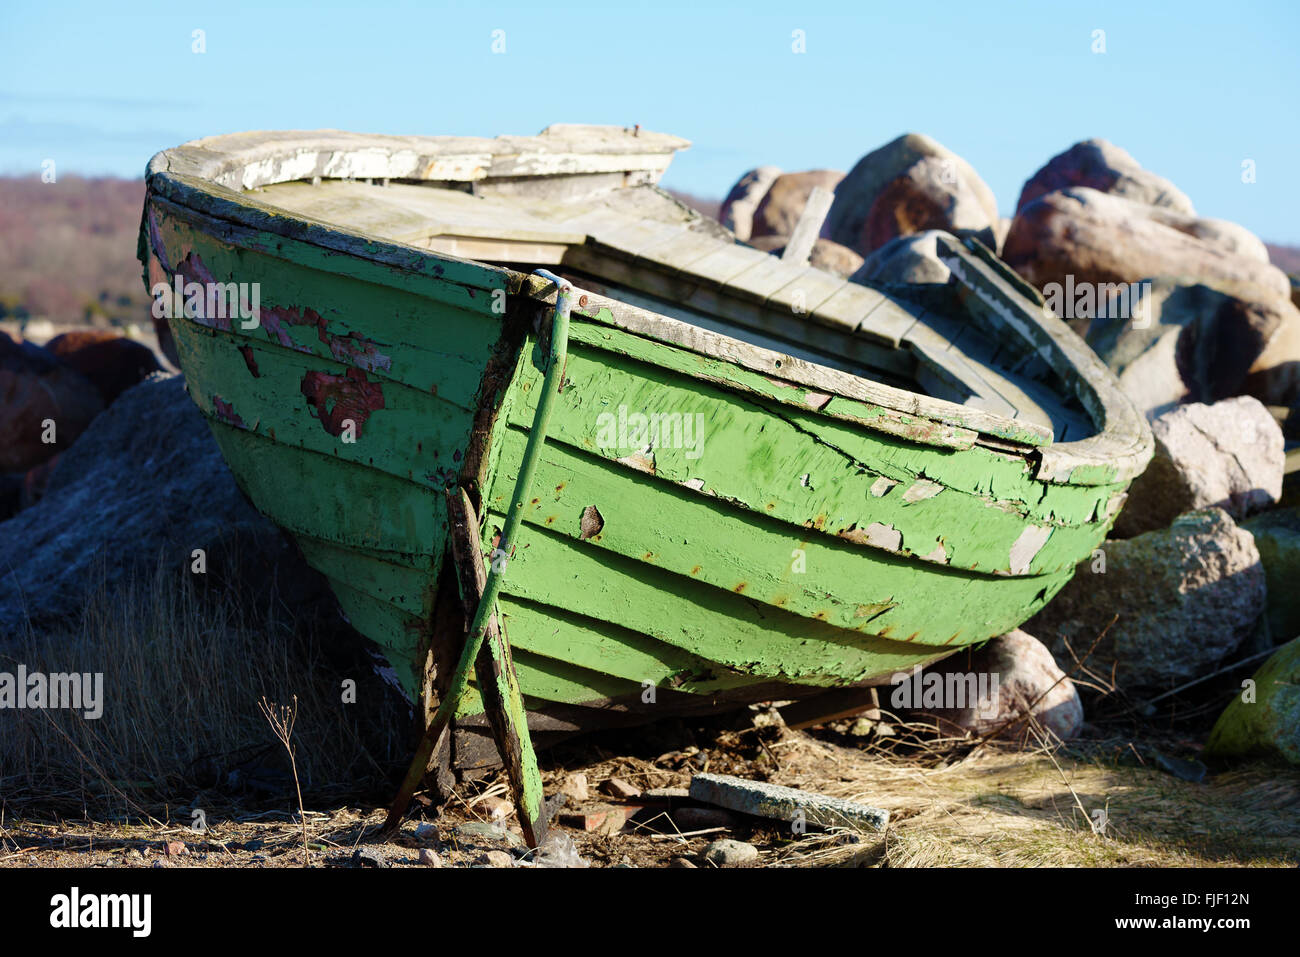 A weathered and gnarled wooden rowboat on land. The boat is painted green. Granite boulders in background. Stock Photo